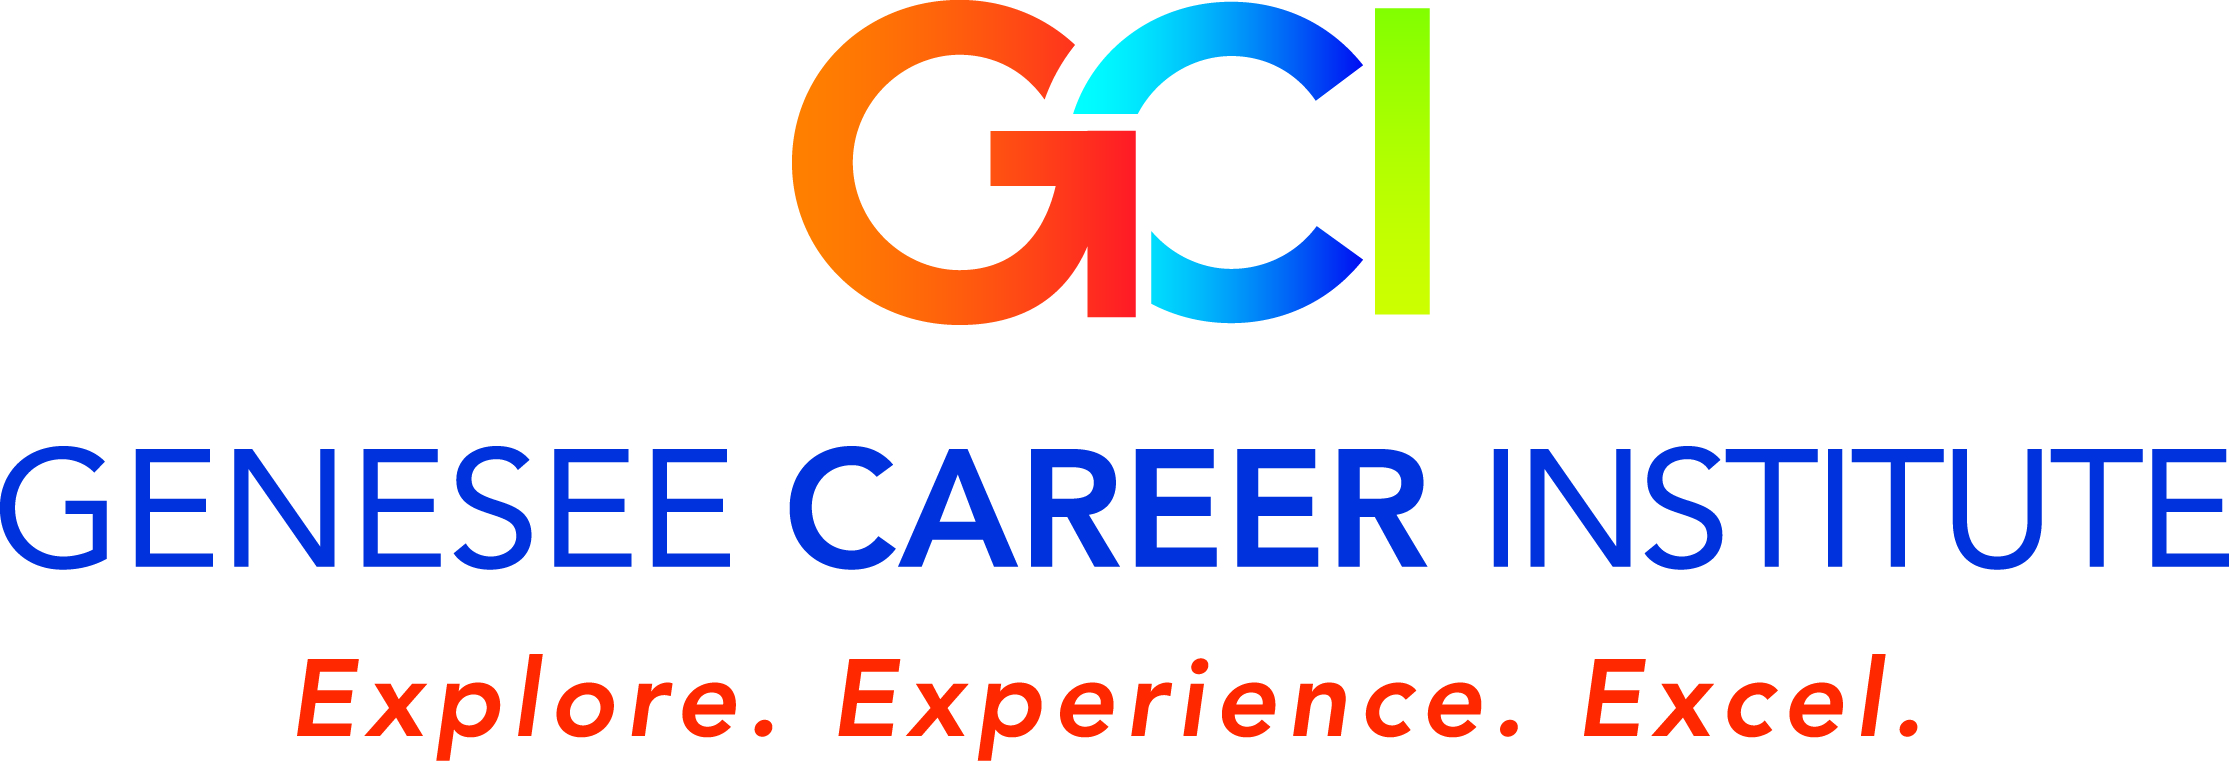 Click here to visit the Genesee Career Institute website